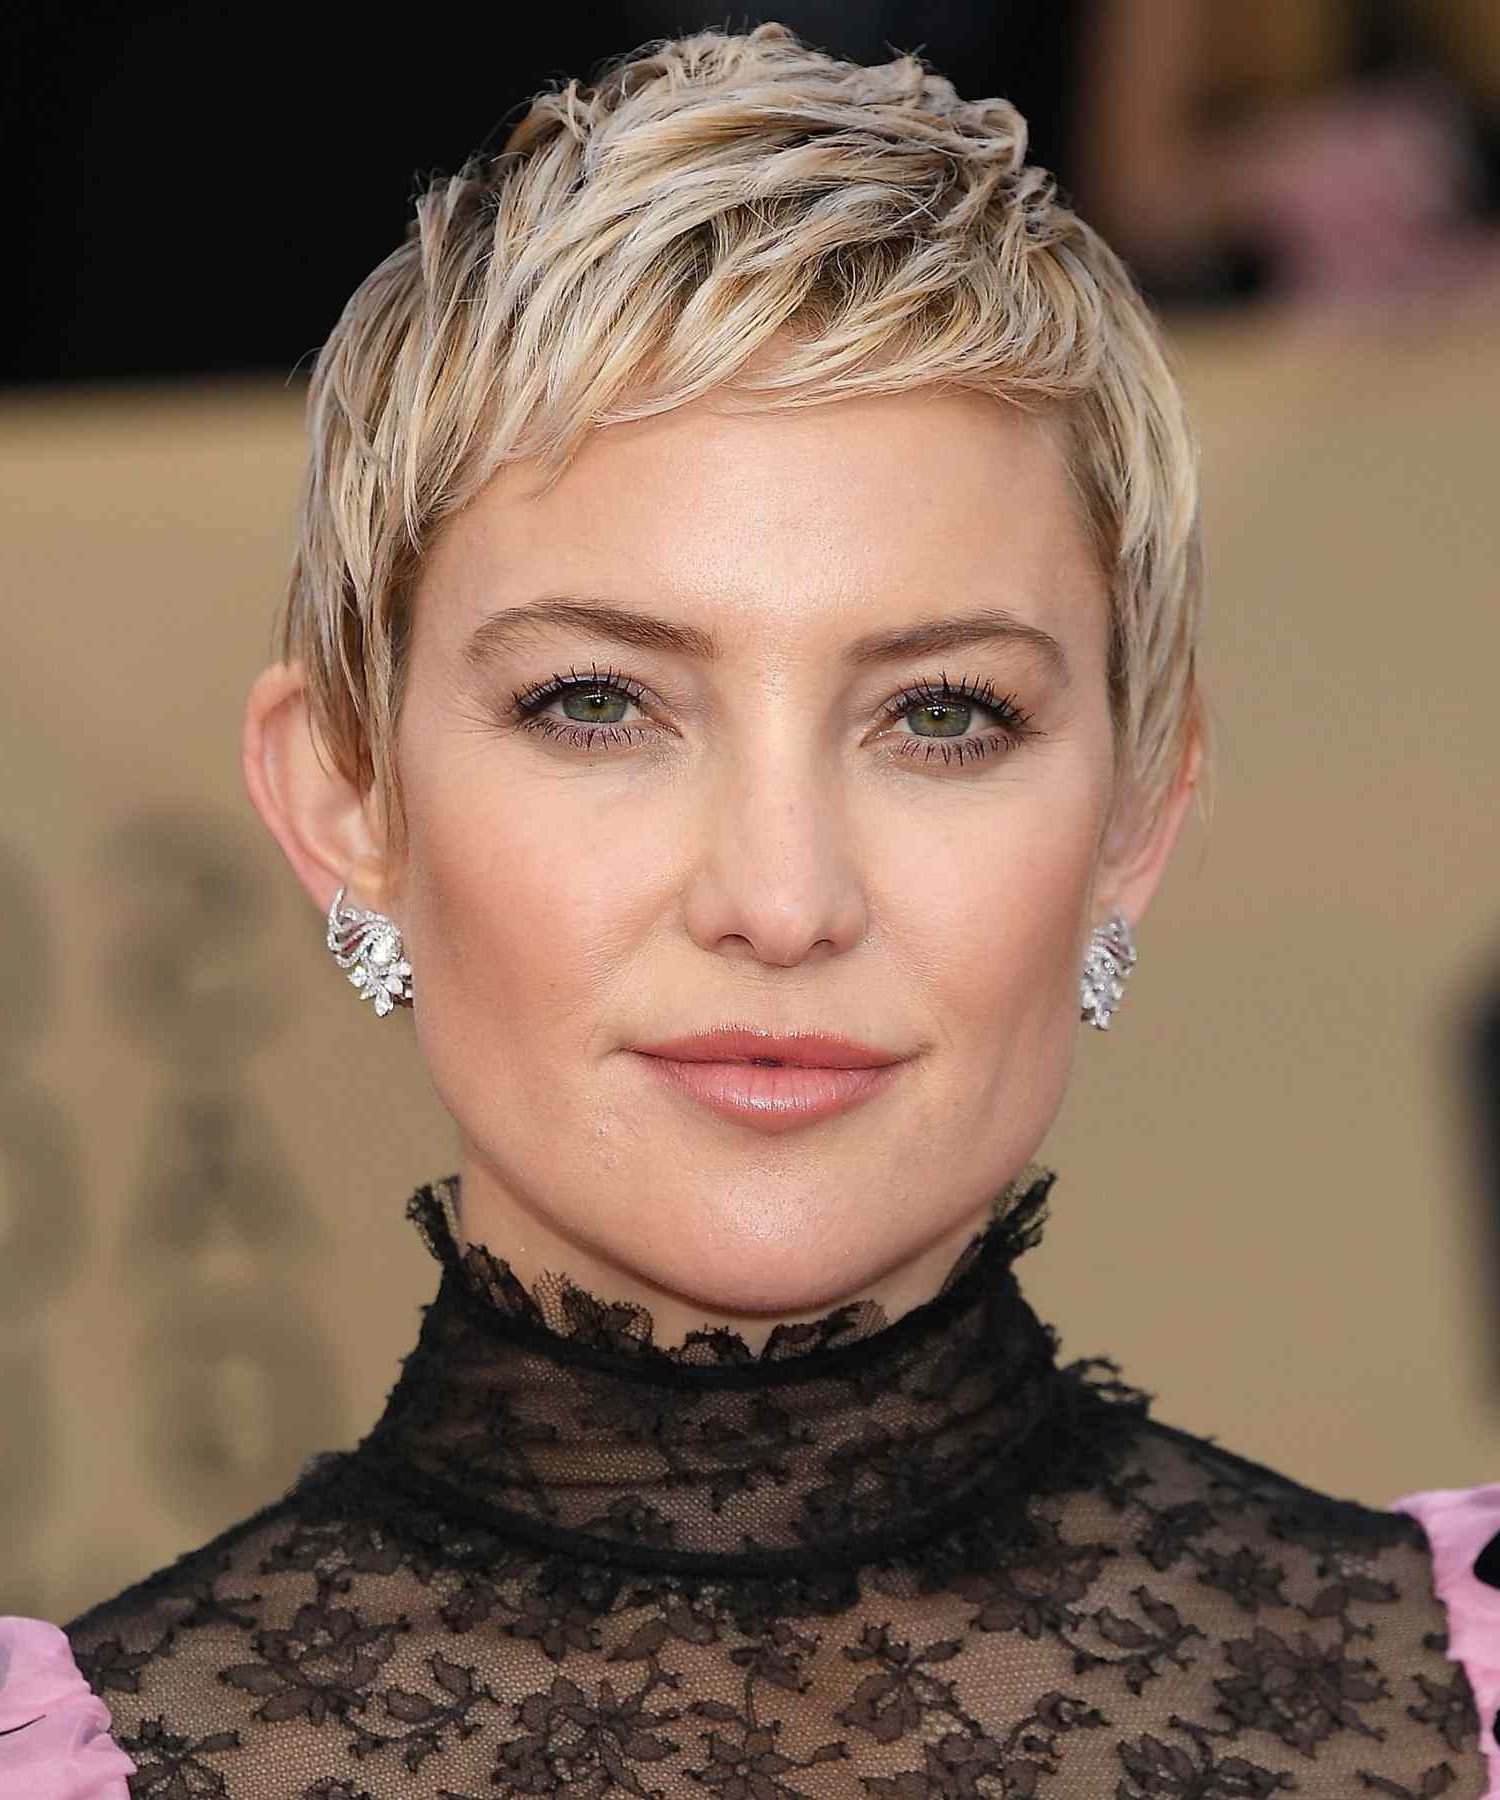 Shaggy Pixie Cuts That'll Convince You To Go Short Inside Voluminous Pixie Hairstyles With Wavy Texture (View 17 of 25)